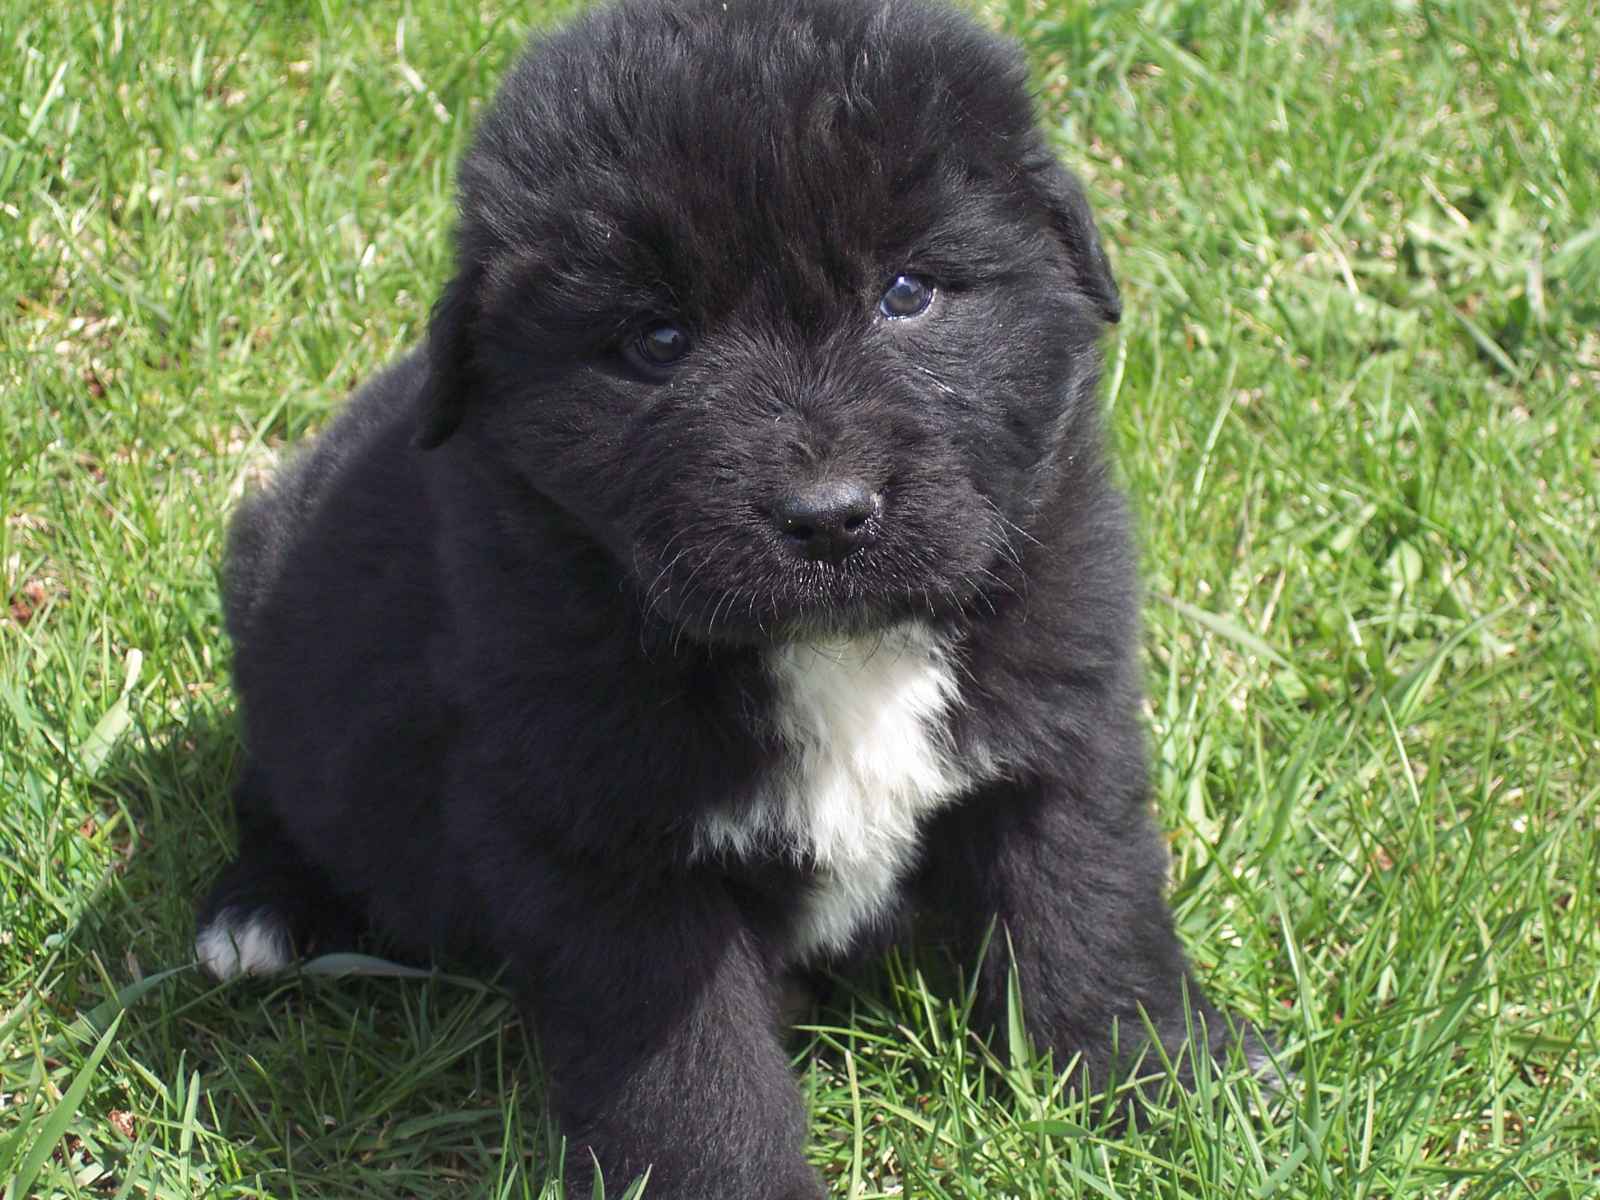 Newfoundland puppy photo and wallpaper. Beautiful Newfoundland puppy picture